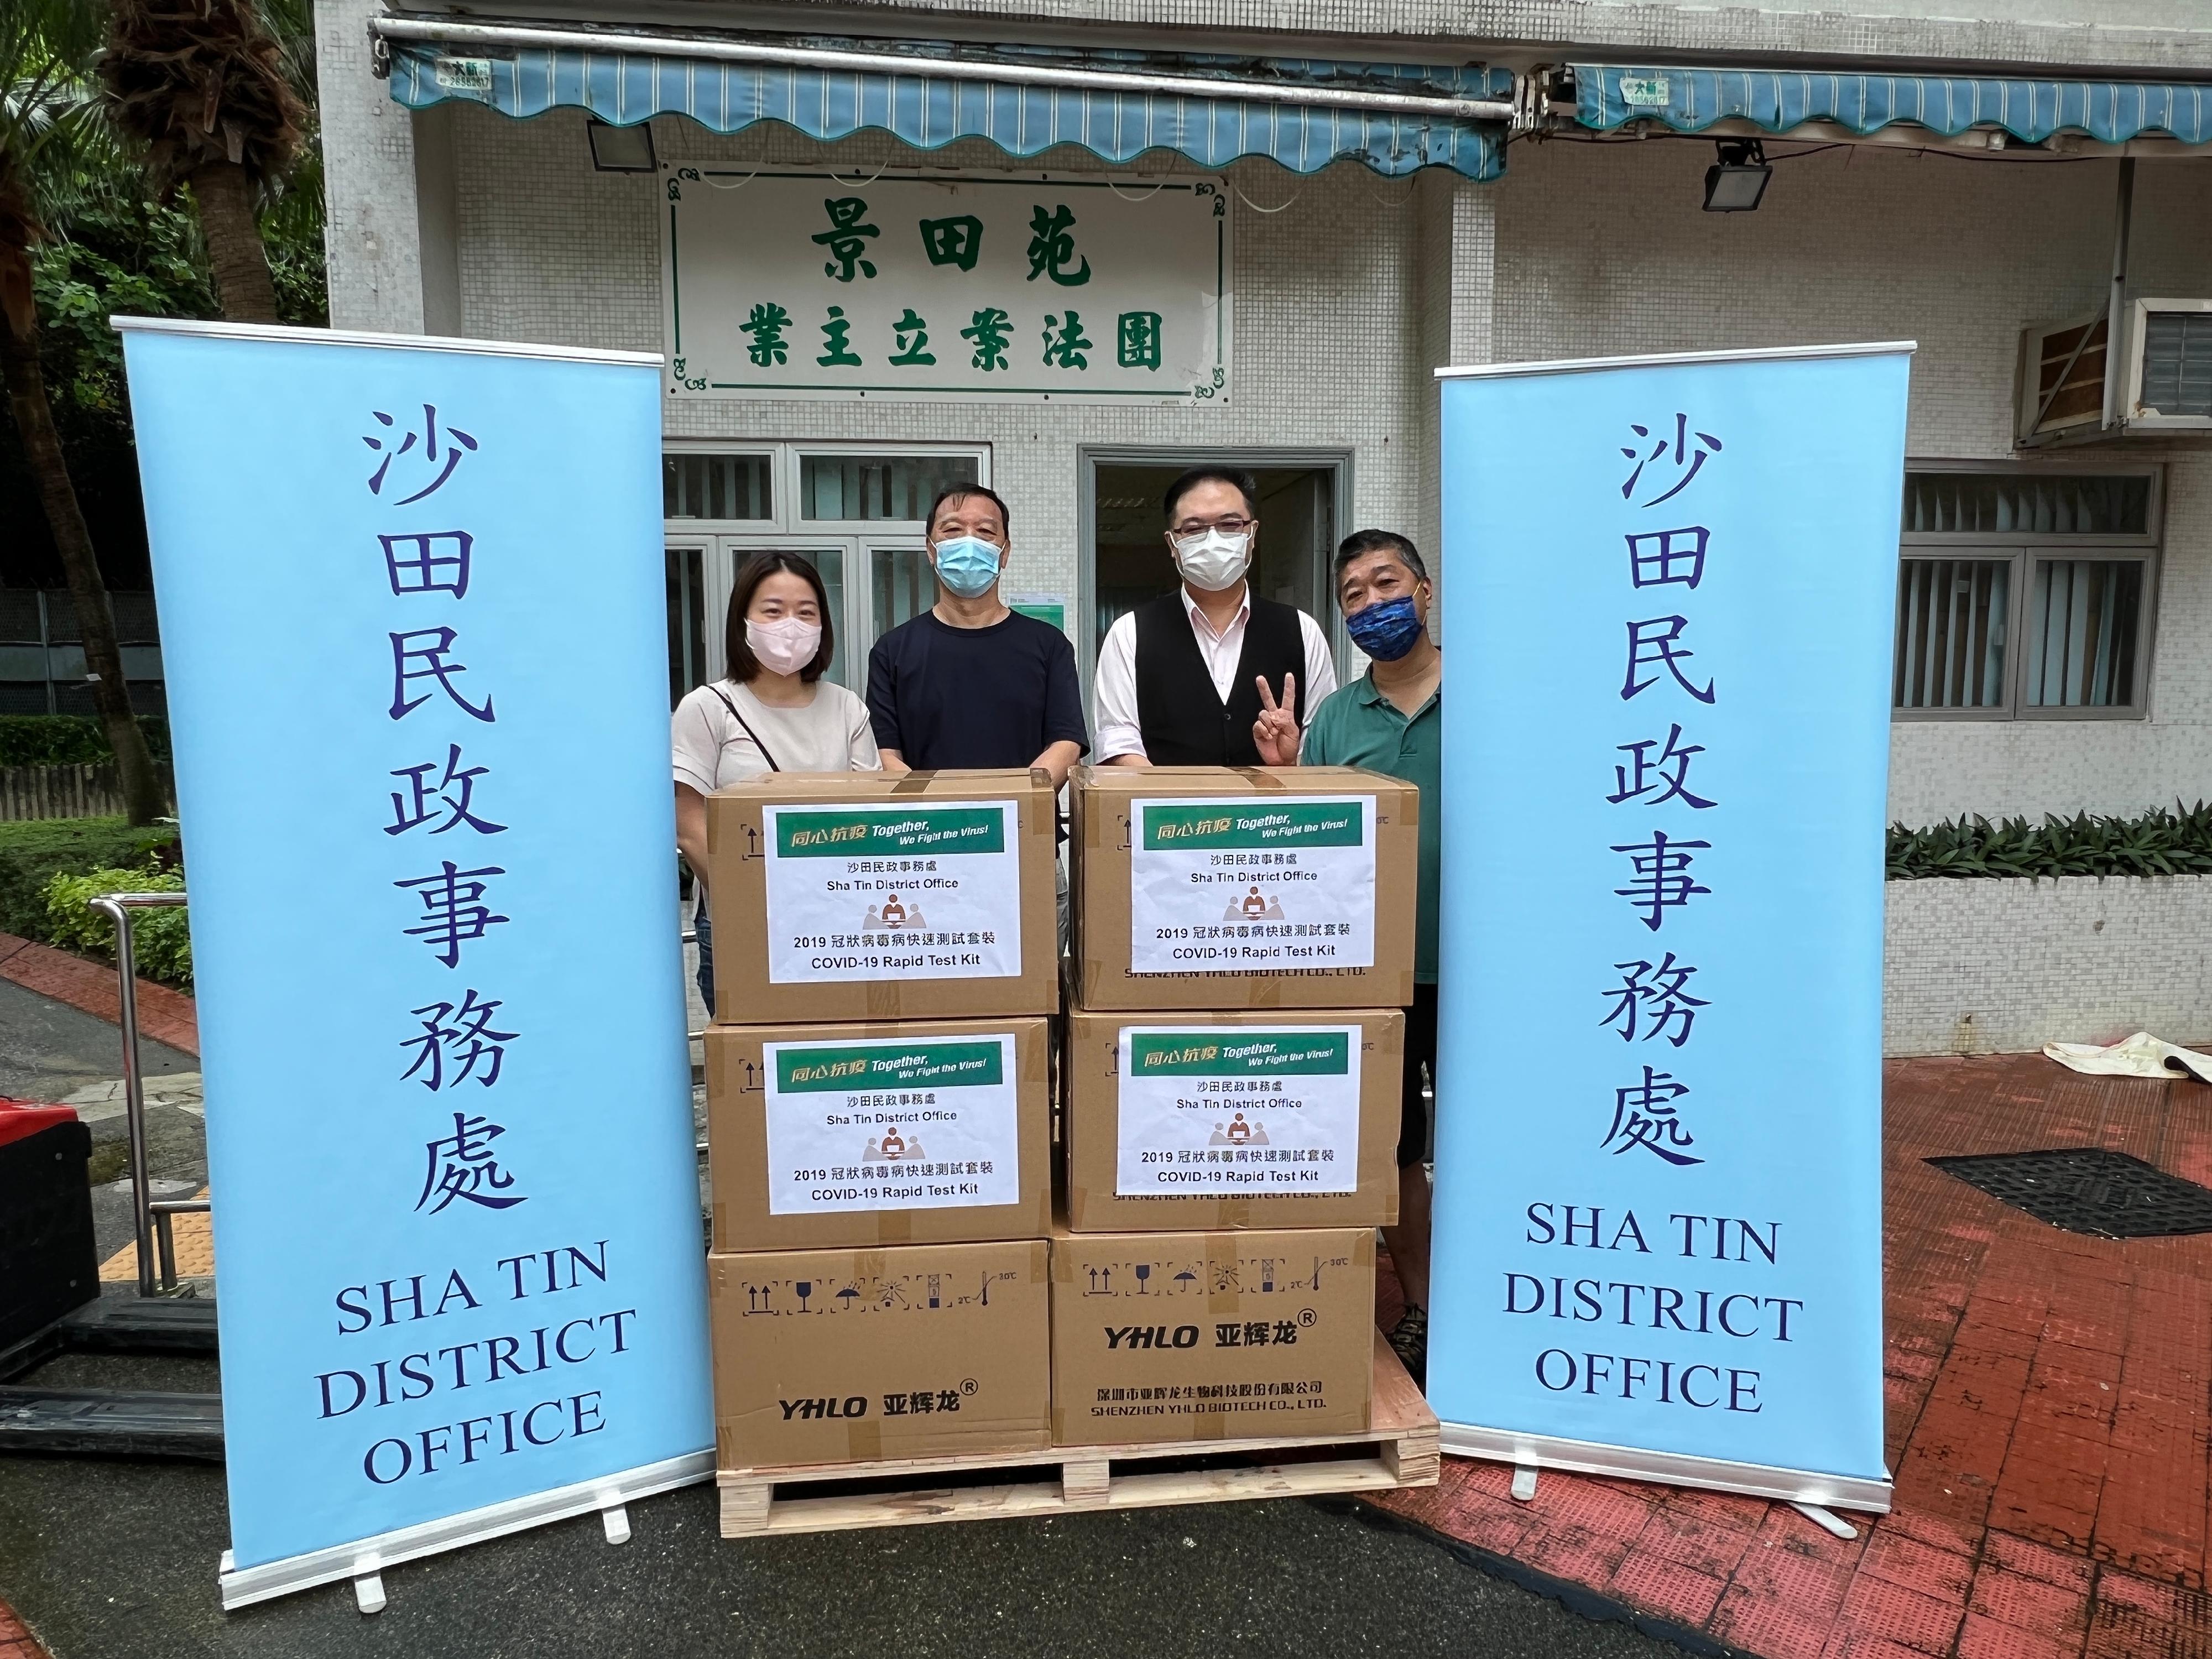 The Sha Tin District Office today (June 15) distributed COVID-19 rapid test kits to households, cleansing workers and property management staff living and working in King Tin Court for voluntary testing through the owners' corporation and the property management company.